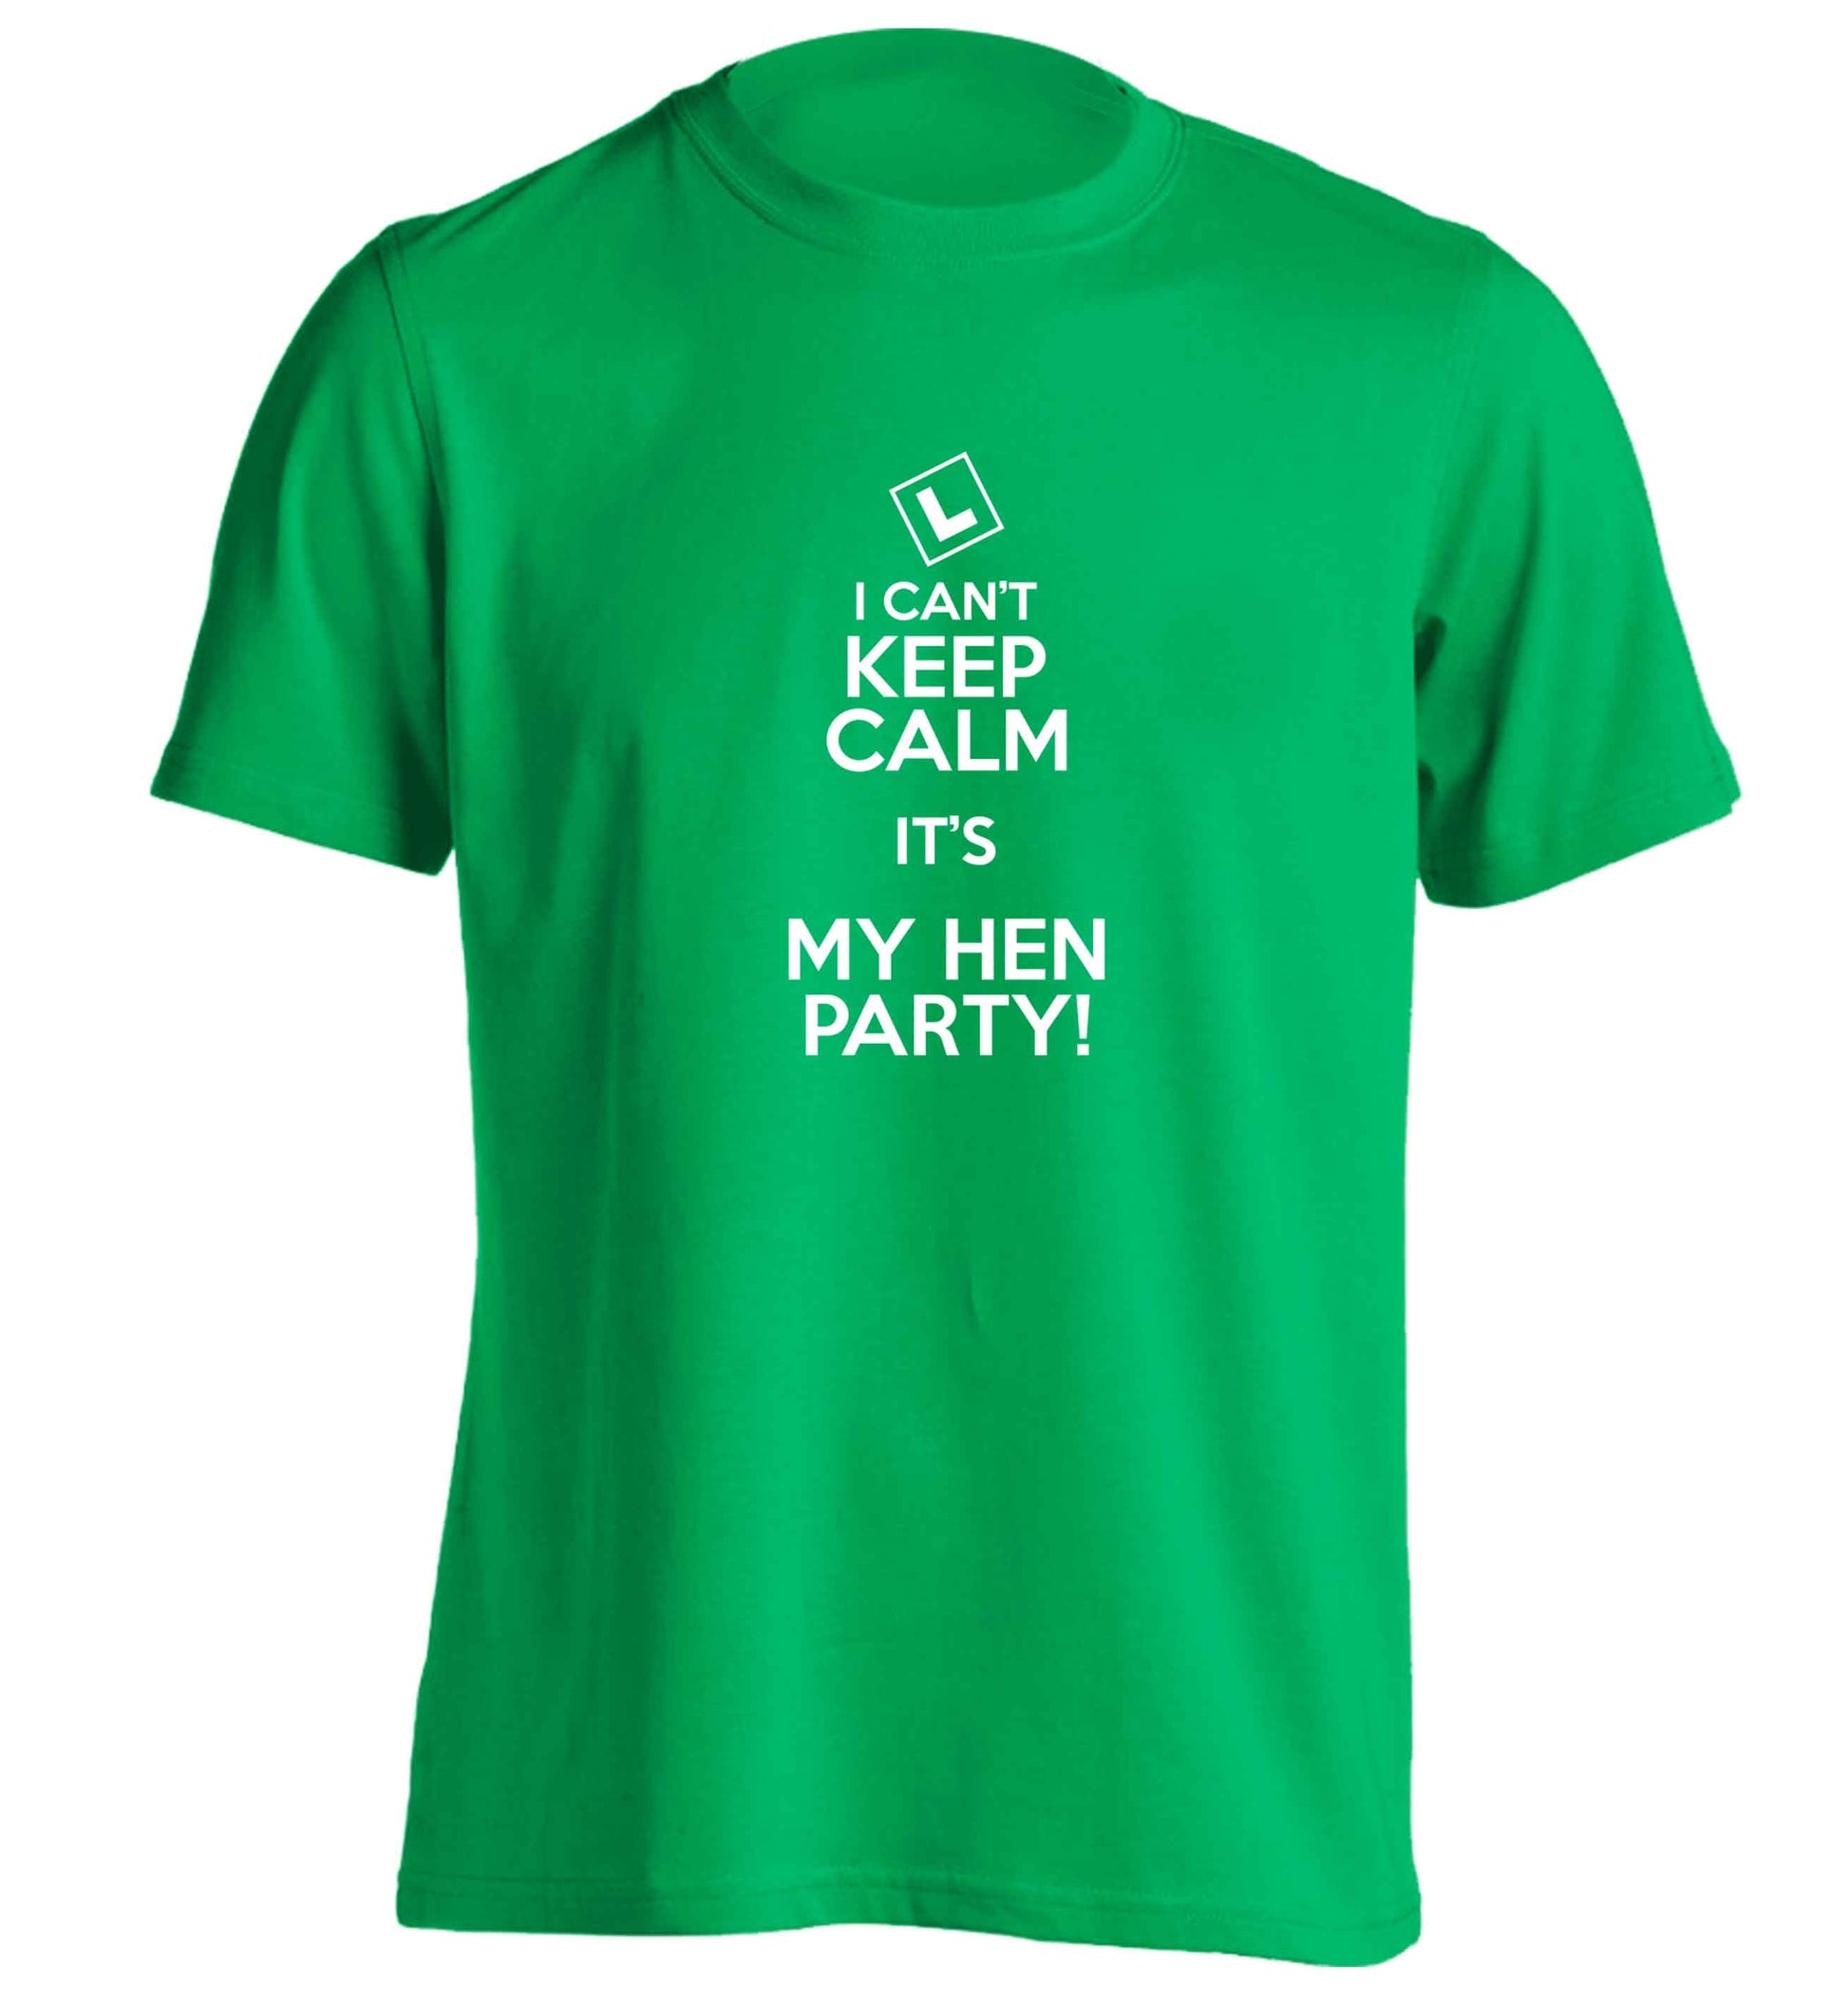 I can't keep calm it's my hen party adults unisex green Tshirt 2XL